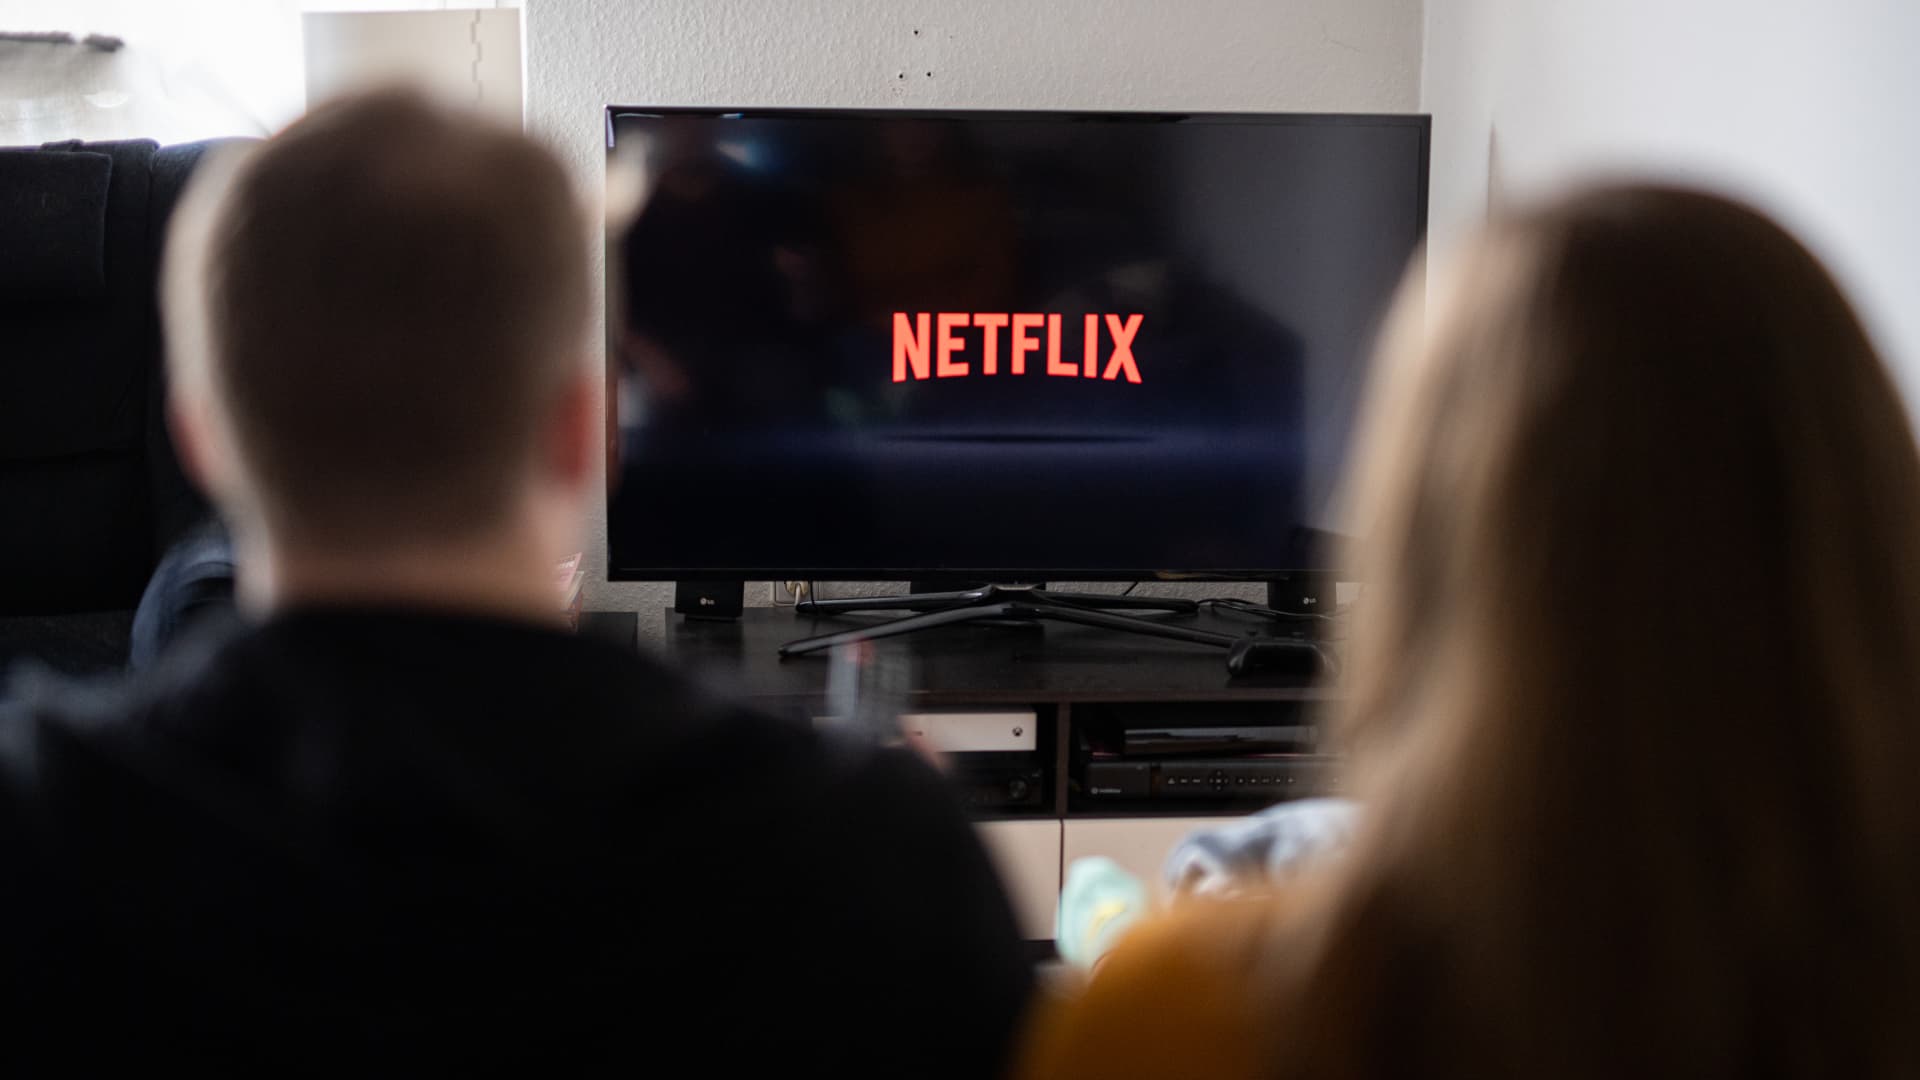 LOS ANGELES — Netflix     will no longer provide quarterly membership numbers or average revenue per user starting next year, the company said Thur